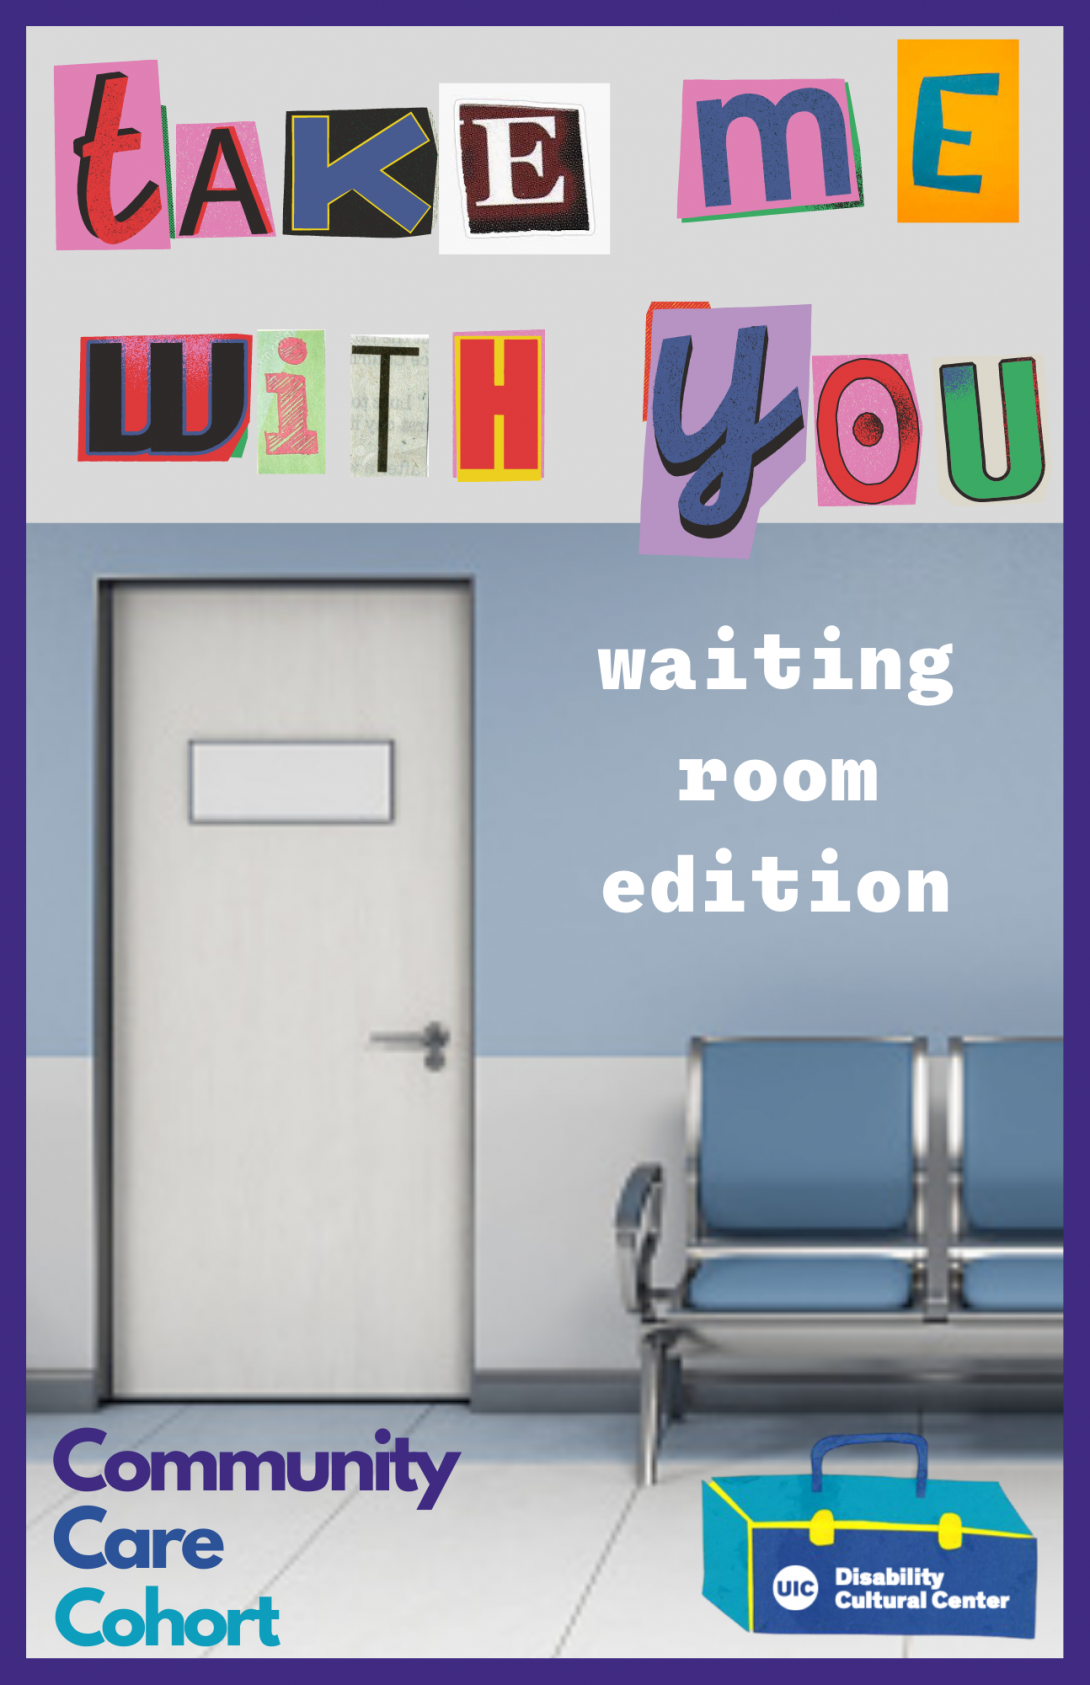 Multicolored block cut-out letters spell out “Take Me WIth You” on the top of the image. The rest of the image depicts a doctor’s waiting room with a half-blue, half-grey wall in the background. There is a white door on the left of the image and the words “waiting room edition” in white are on the wall above blue plastic chairs on the right side of the image. The Community Care Cohort and Disability Cultural Center logos are on the bottom left and bottom right of the image respectively.